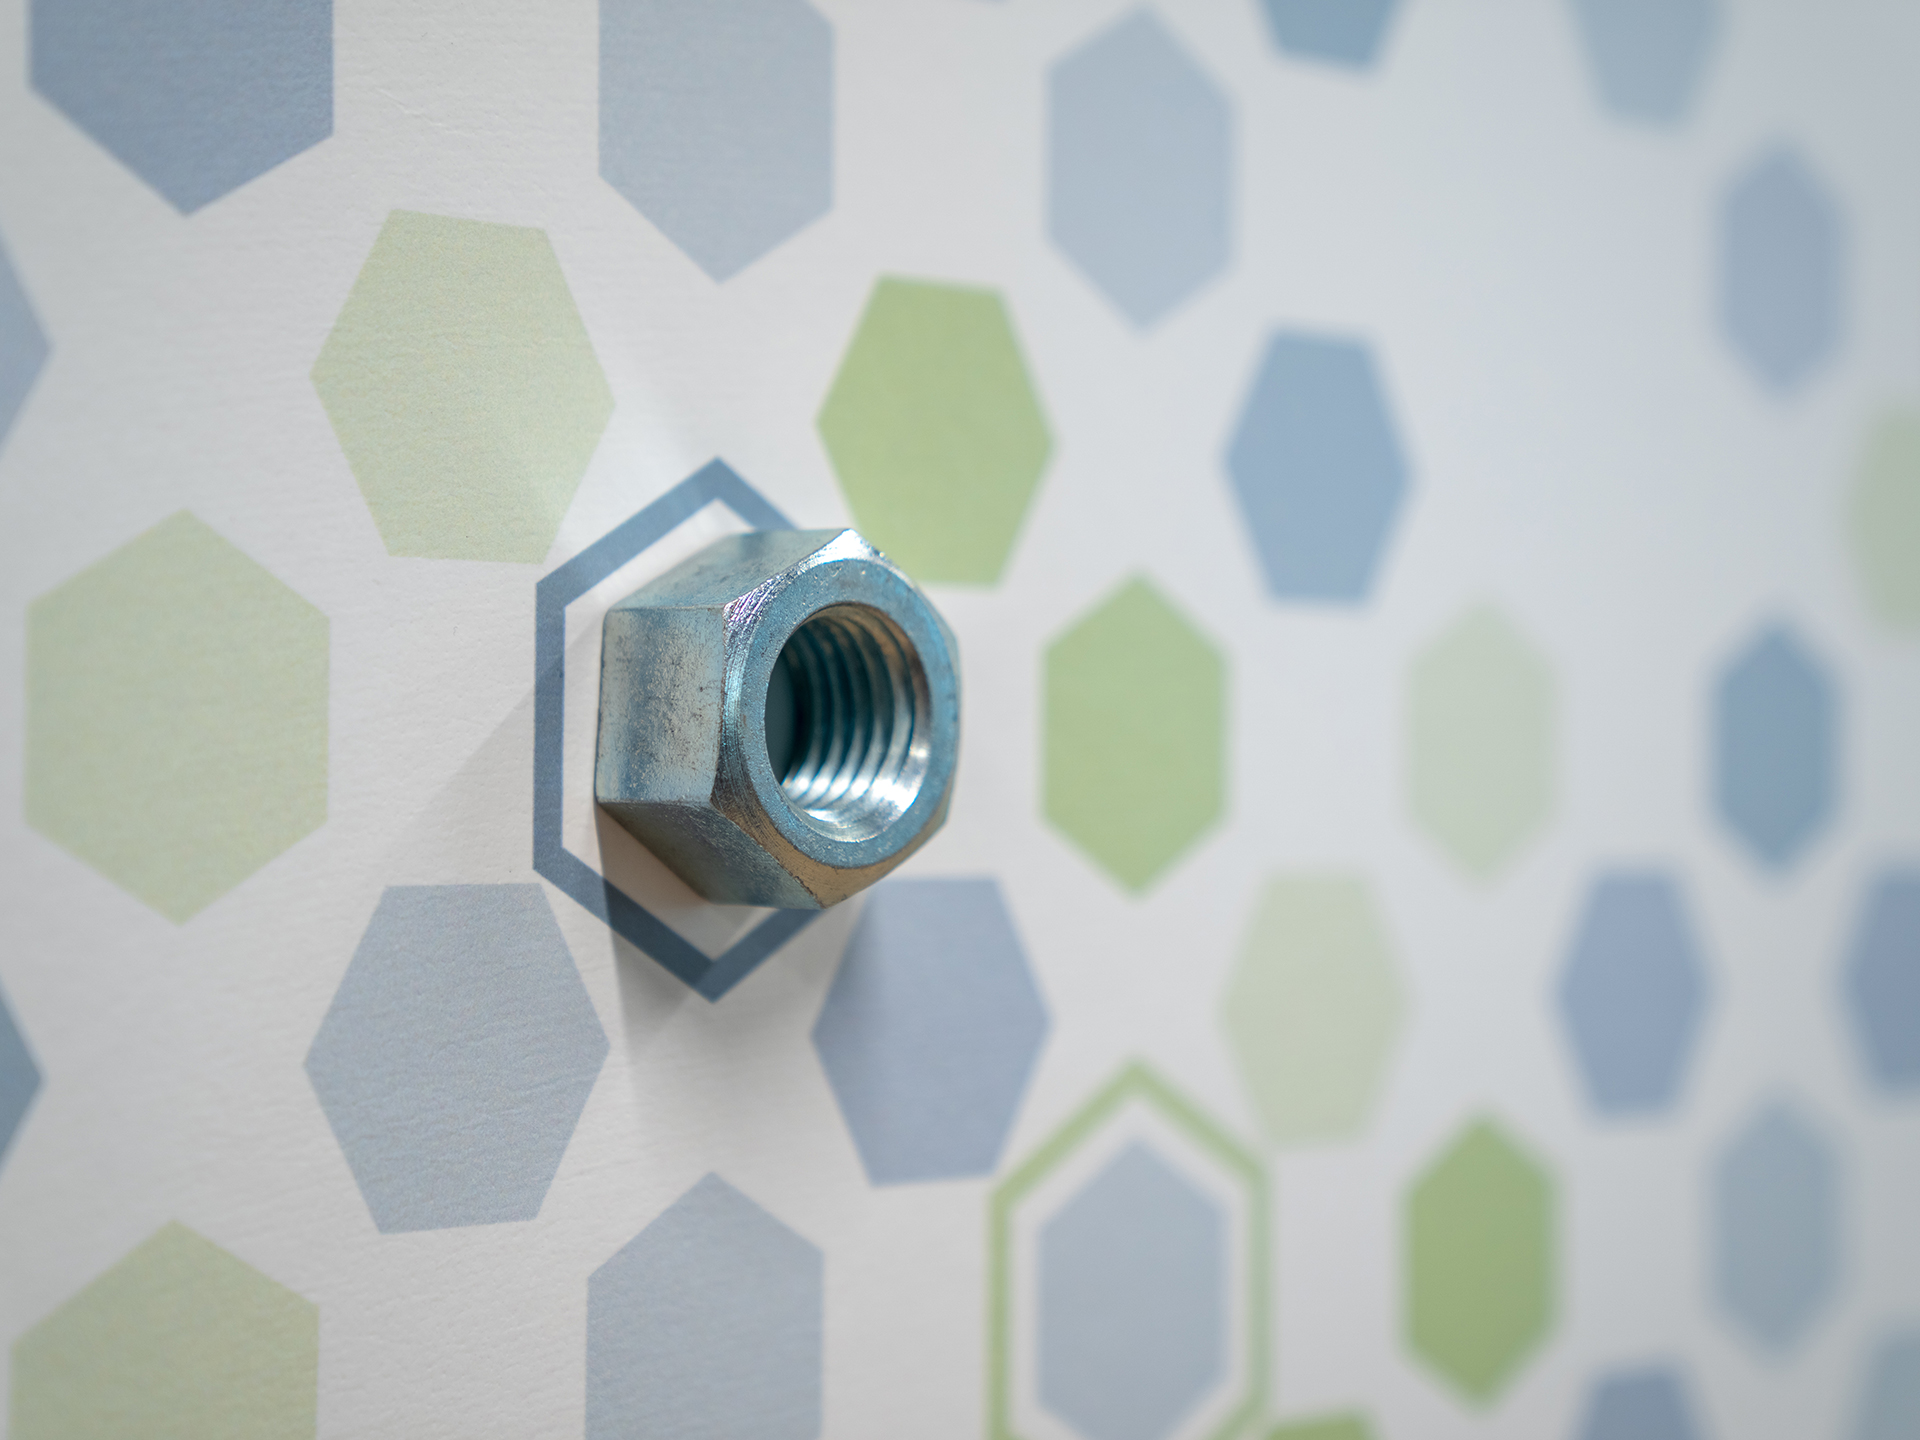 Wall graphic with colorful hexagons and hex nuts